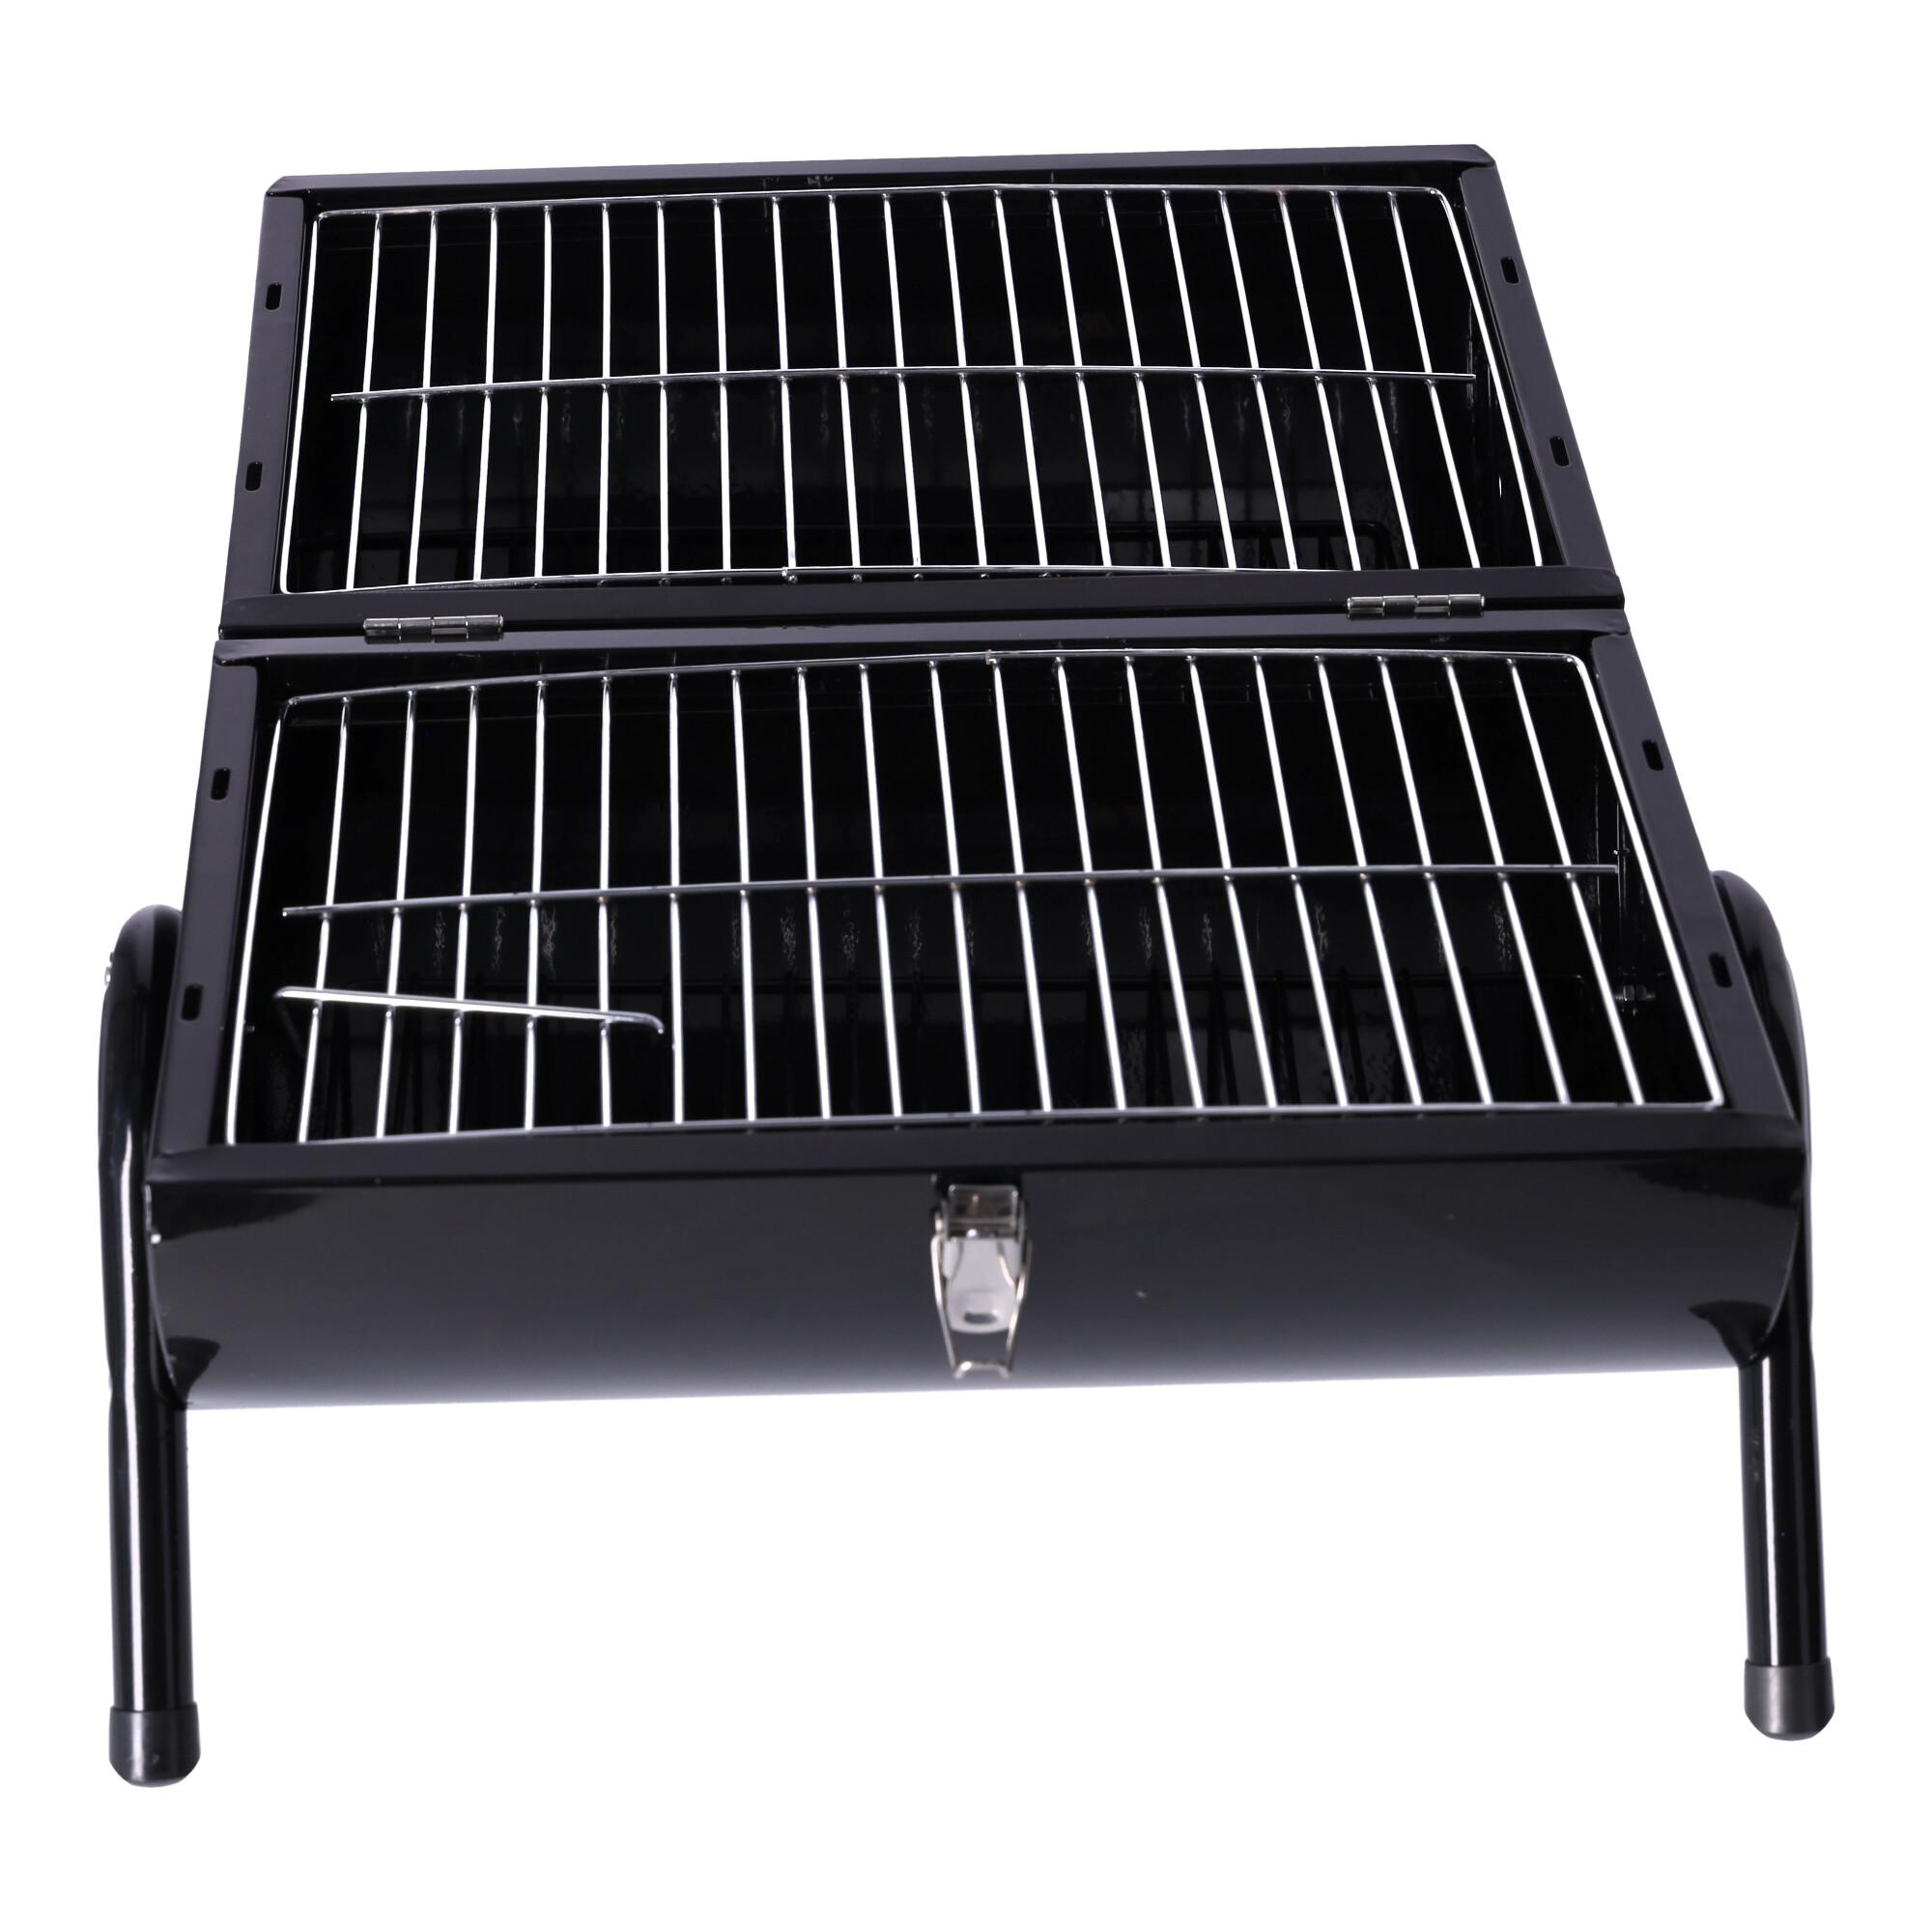 The infectious camping grill-black